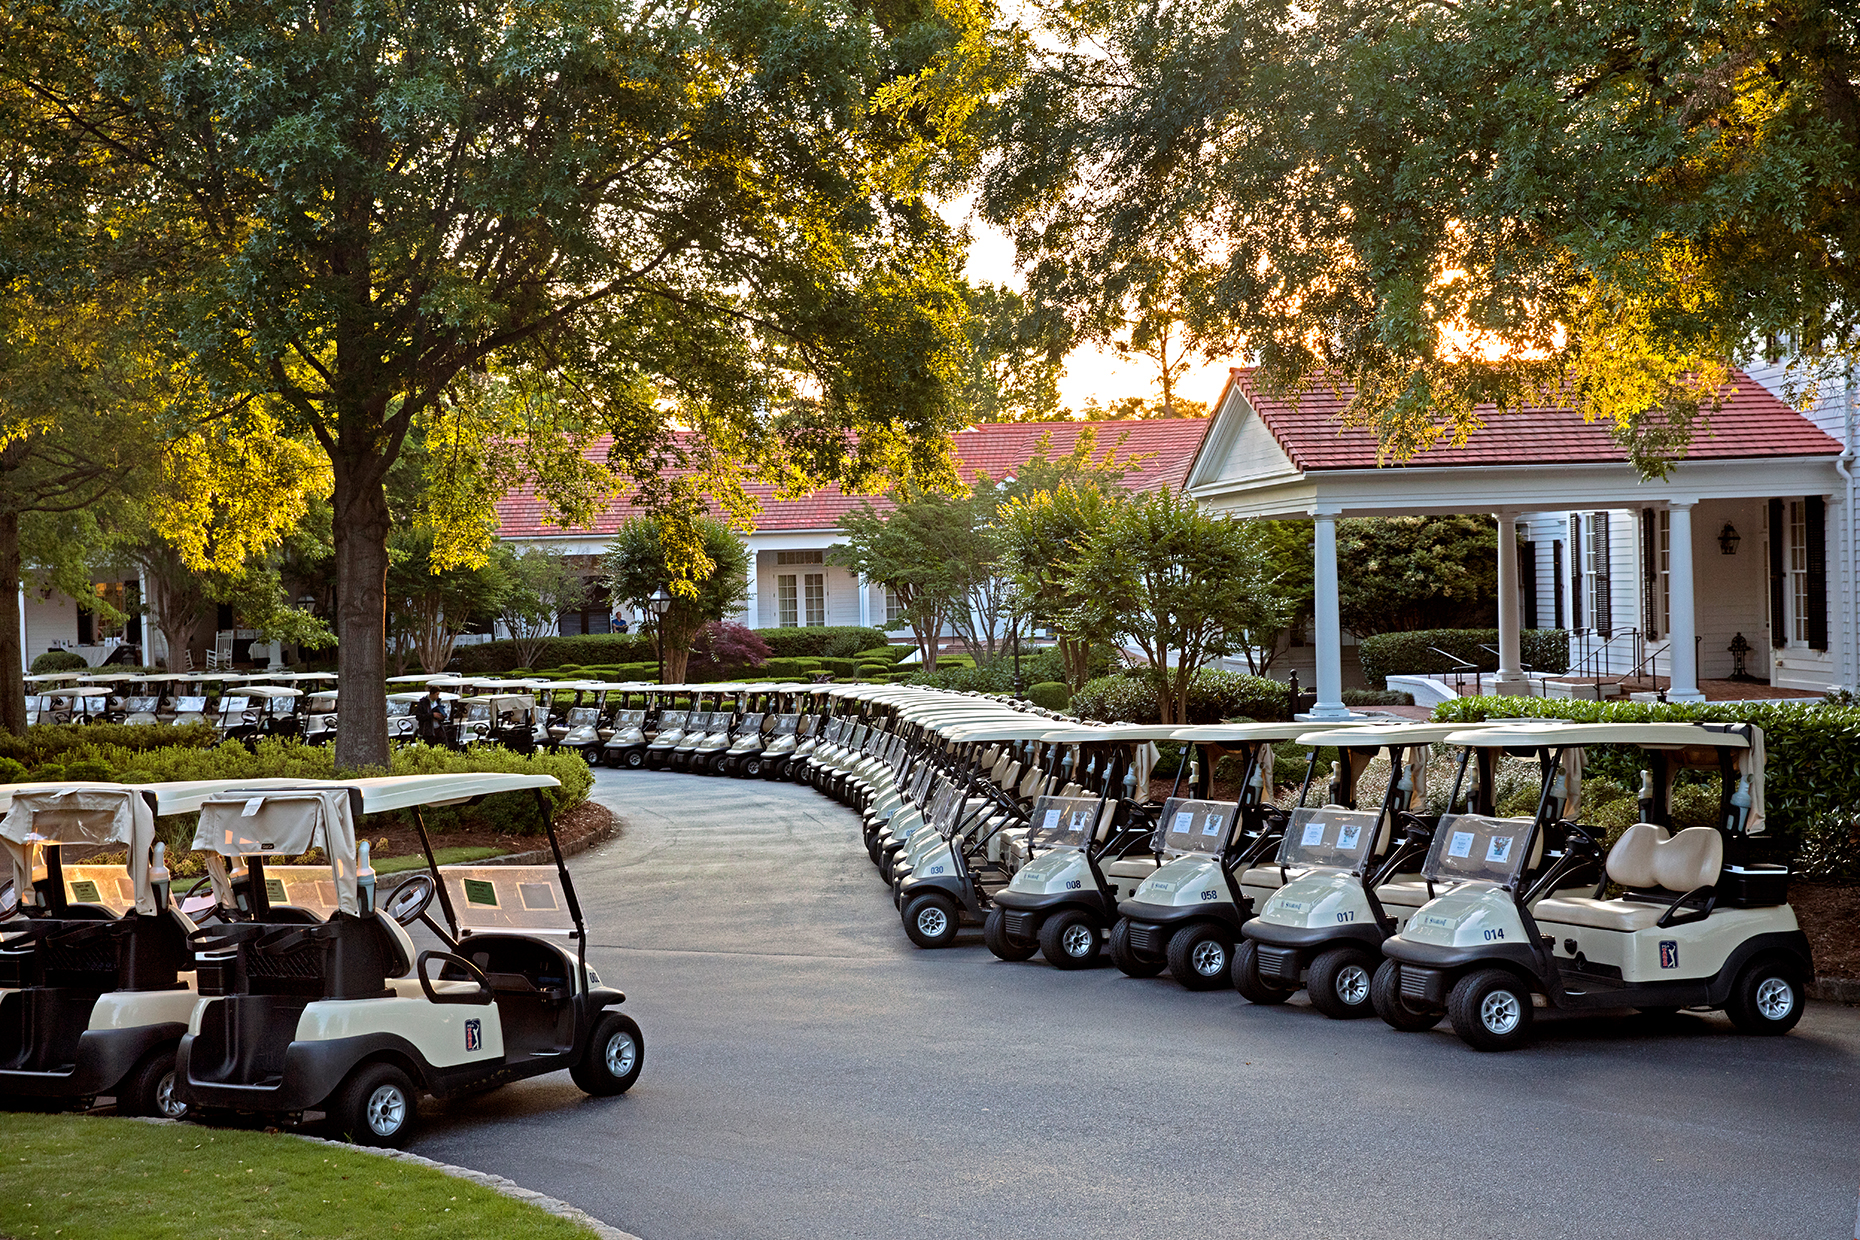 Carts in morning prior to event copy.jpg